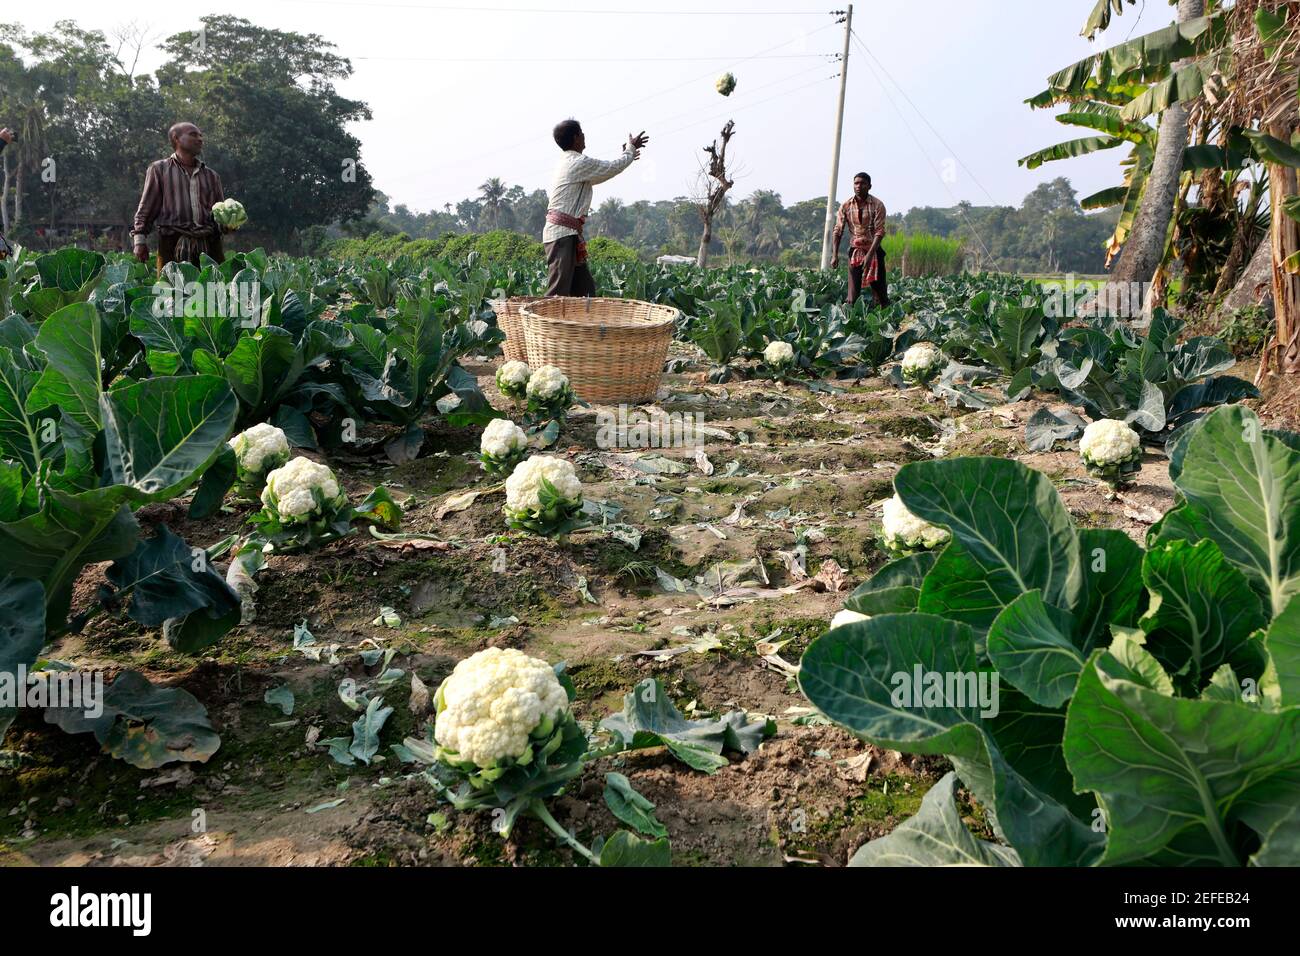 Khulna, Bangladesh - February 06, 2021: The farmers are picking winter vegetable cauliflower from their fields for sale in the market at Dumuria in Kh Stock Photo